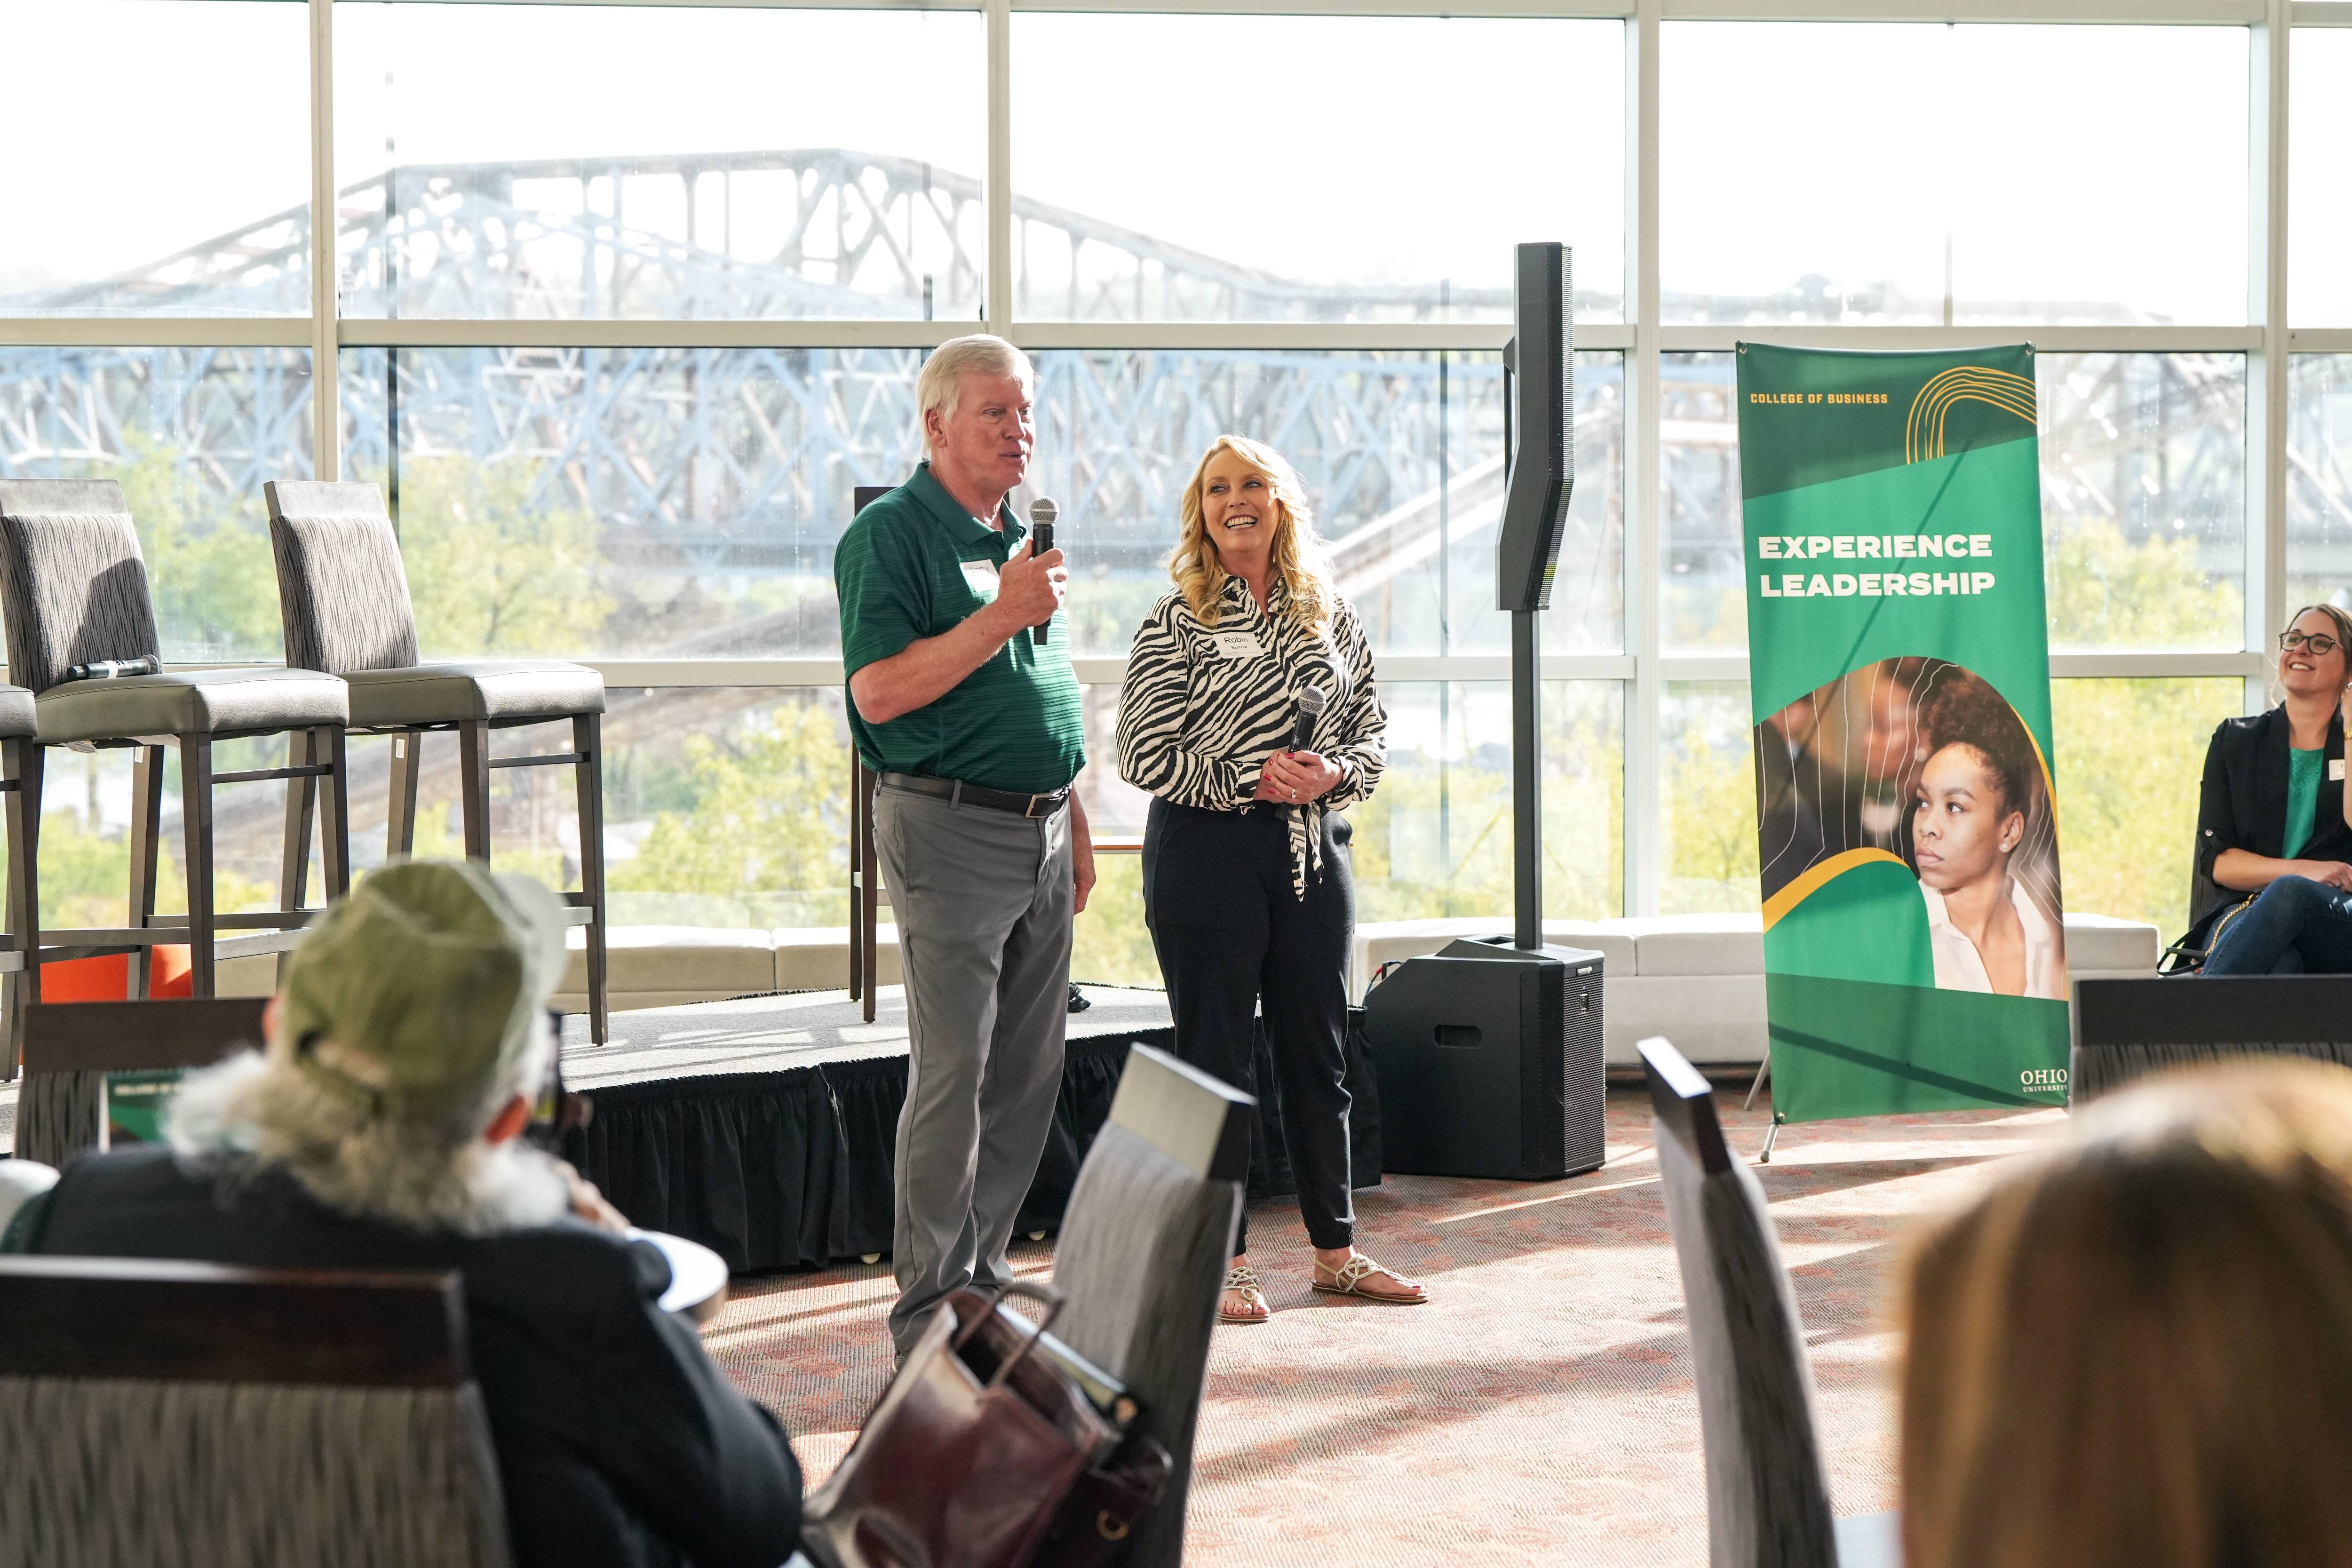 Jimmy and Robin Burrow, parents of Joe Burrow, presented the keynote address at the Bobcat Networking Event